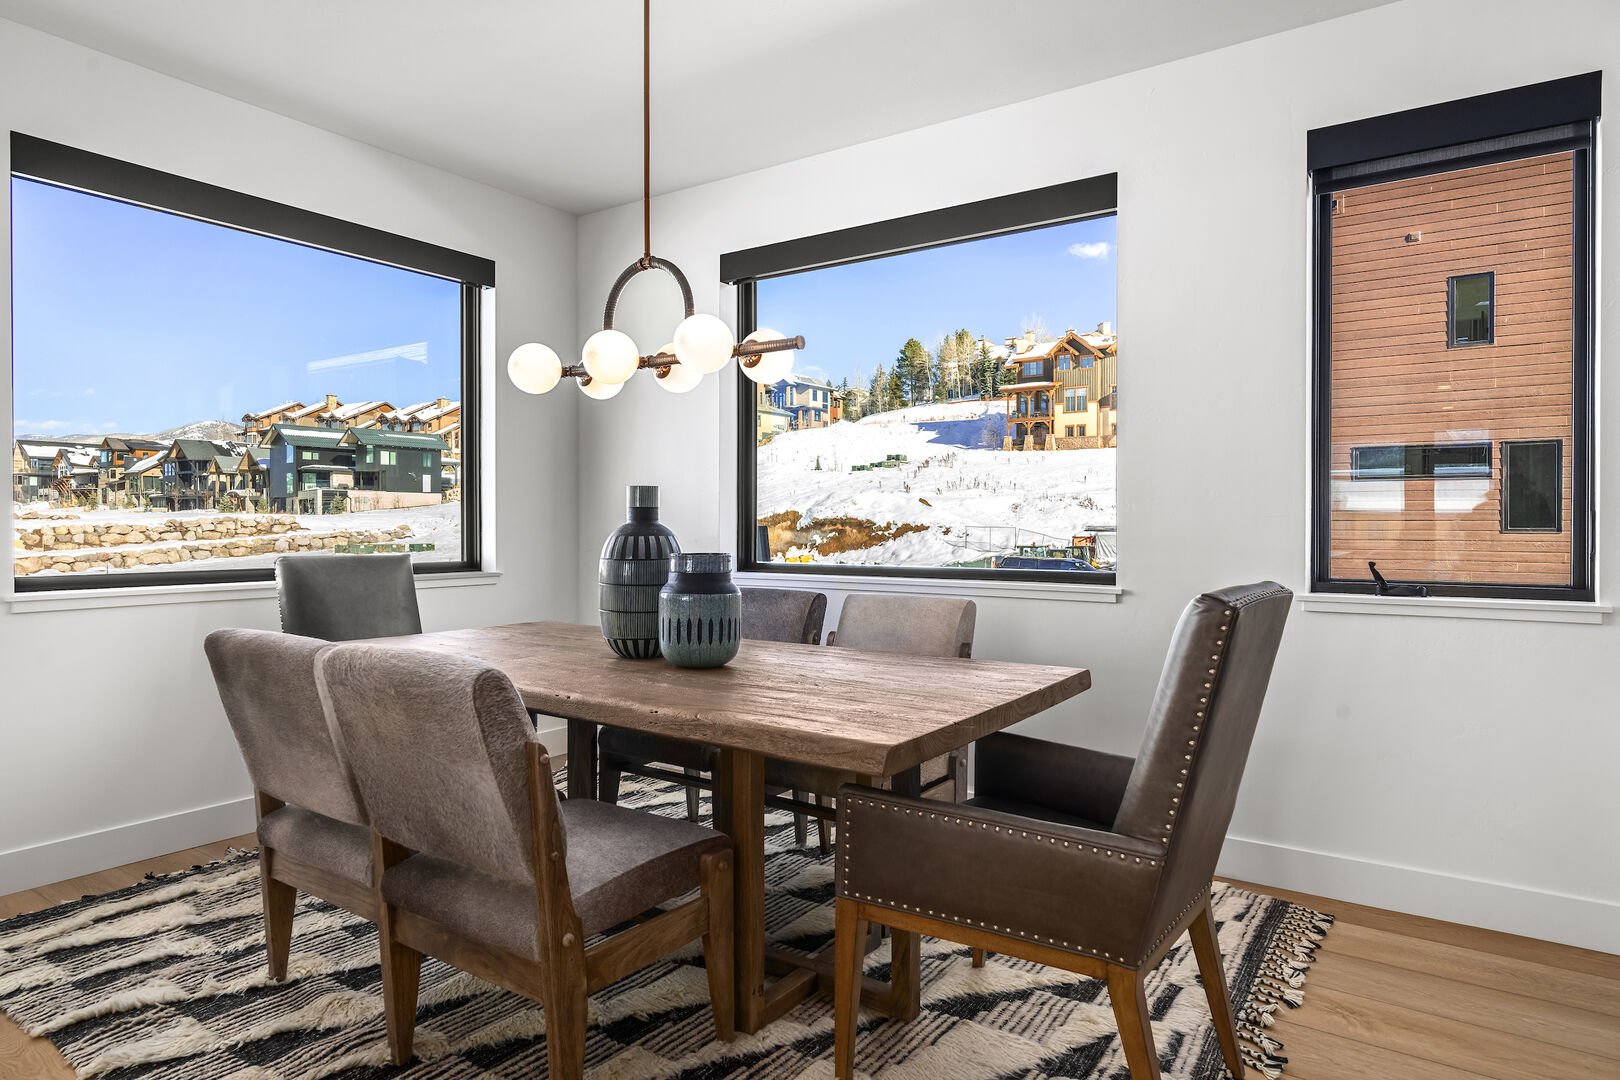 Views of the Ski Area from the Dining Room